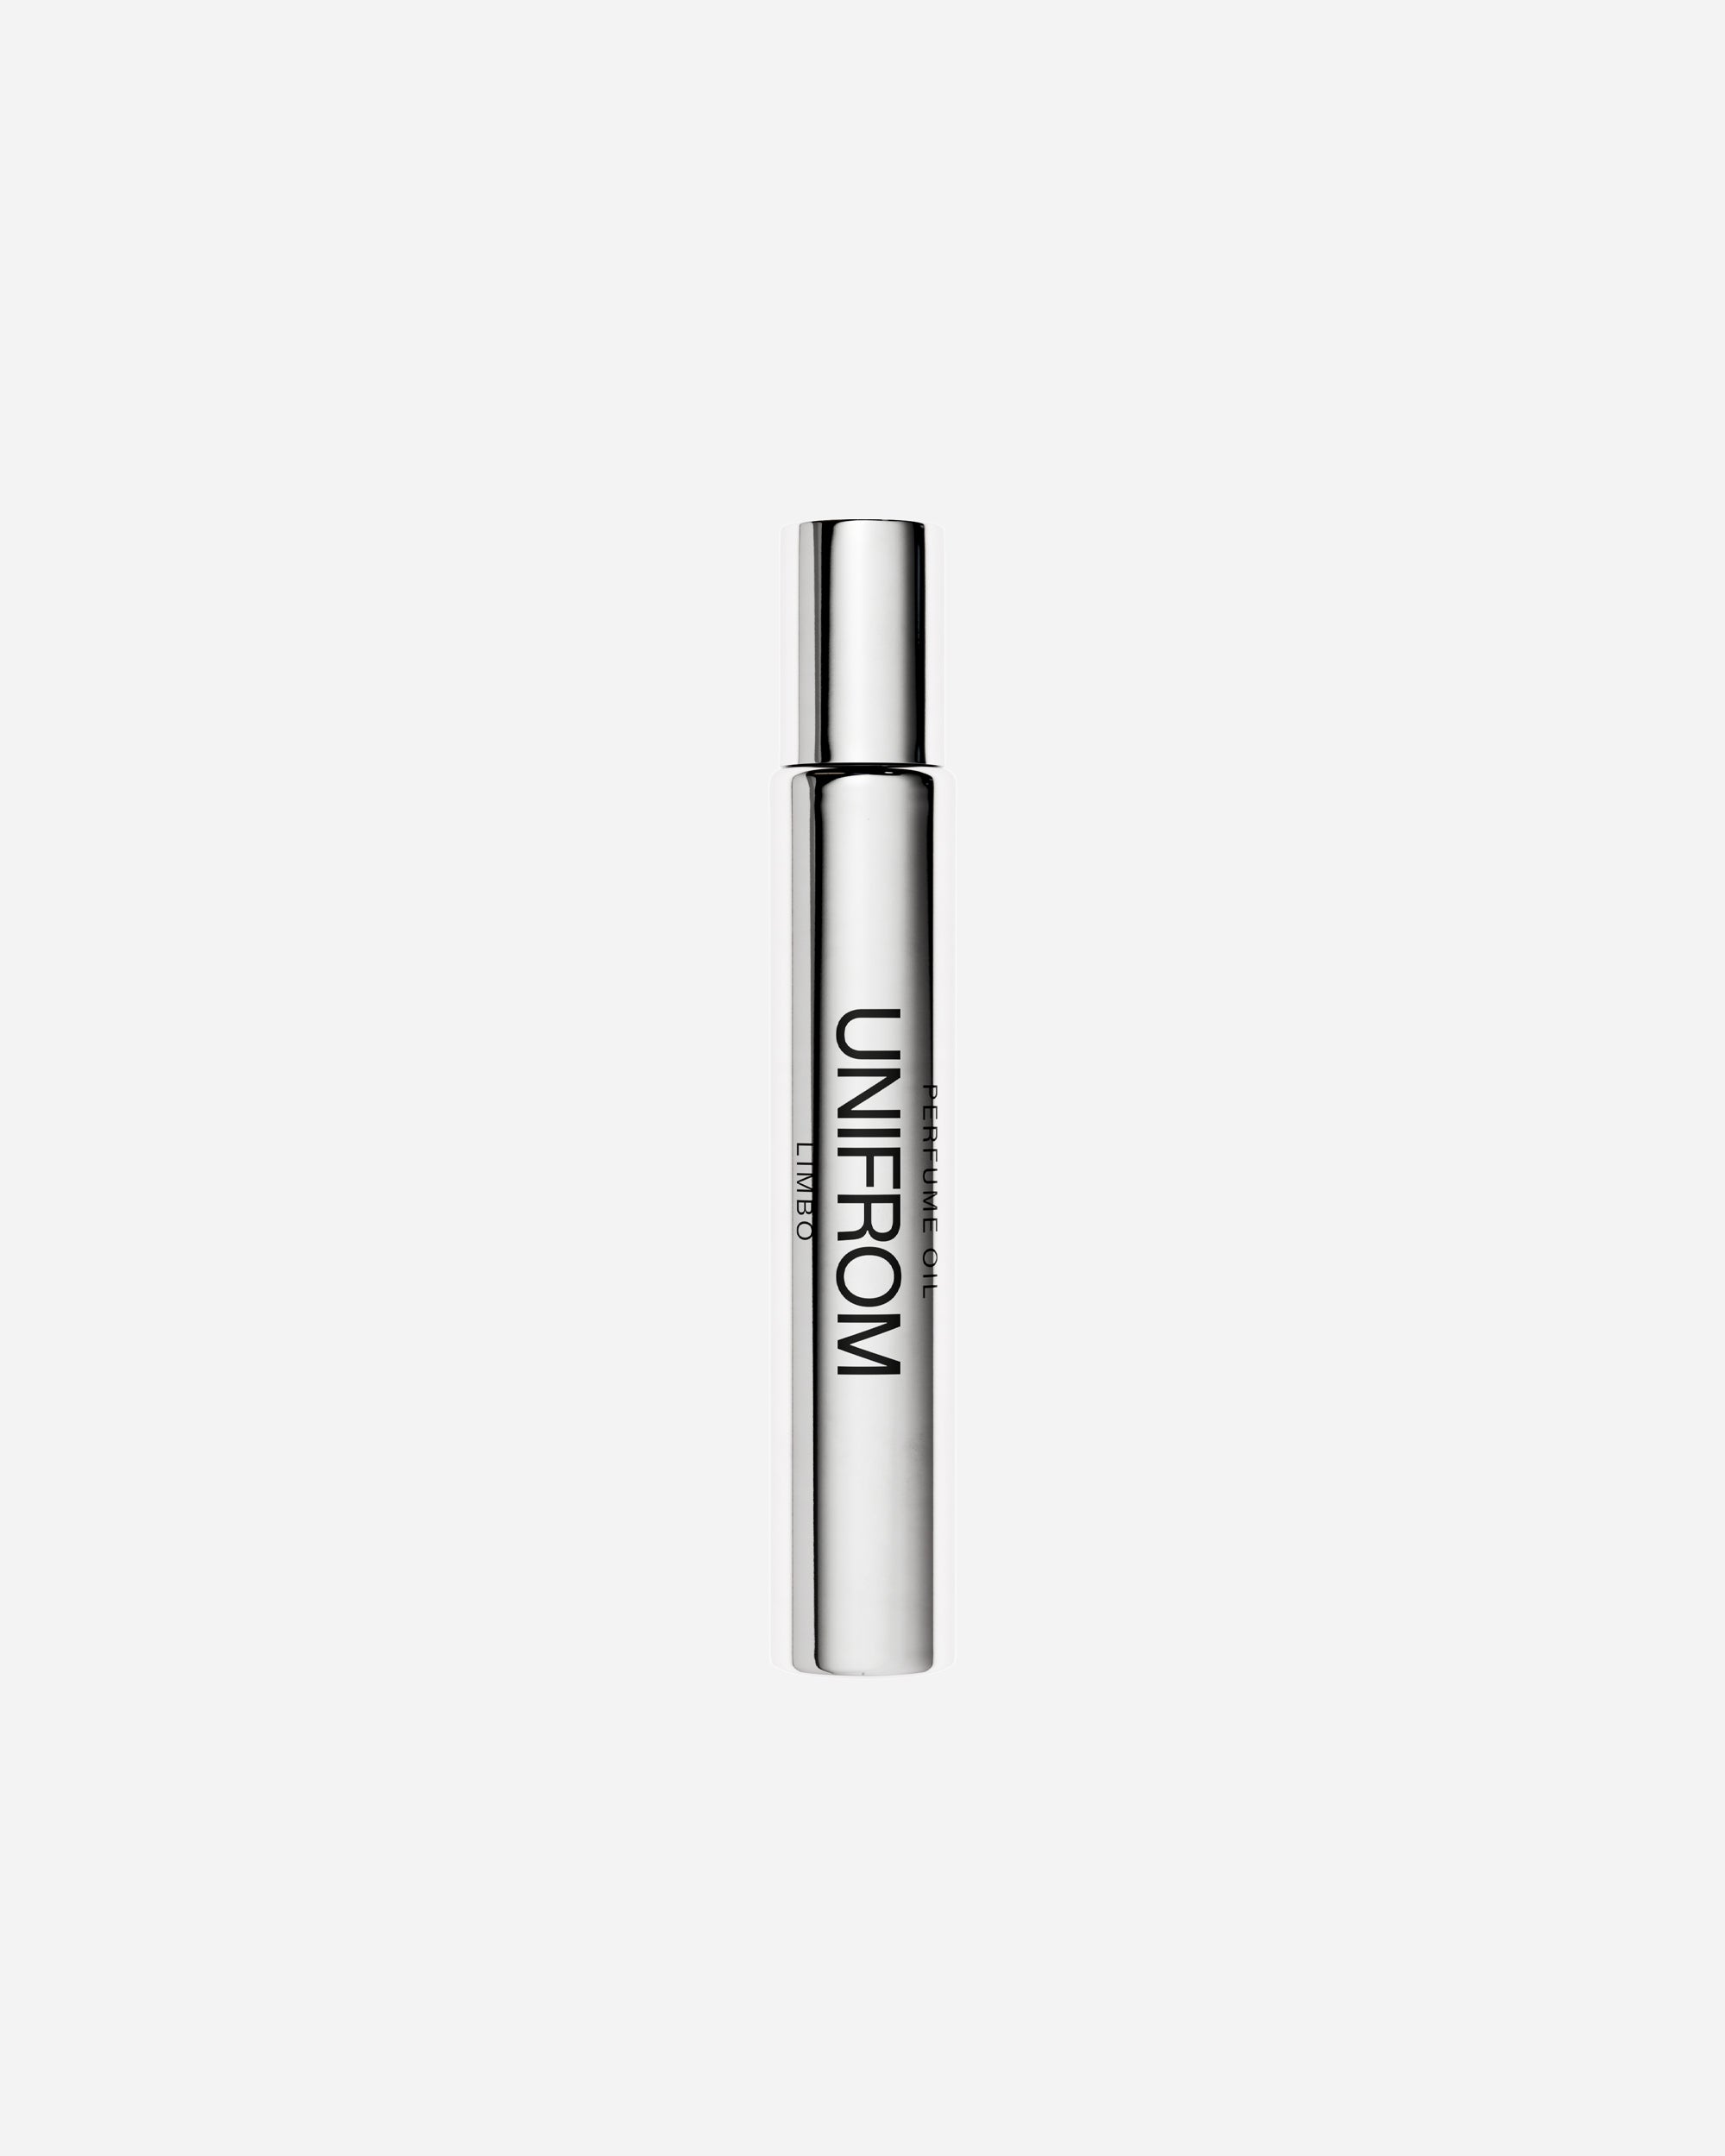 UNIFROM Limbo Perfume Oil  UNIFROM-003